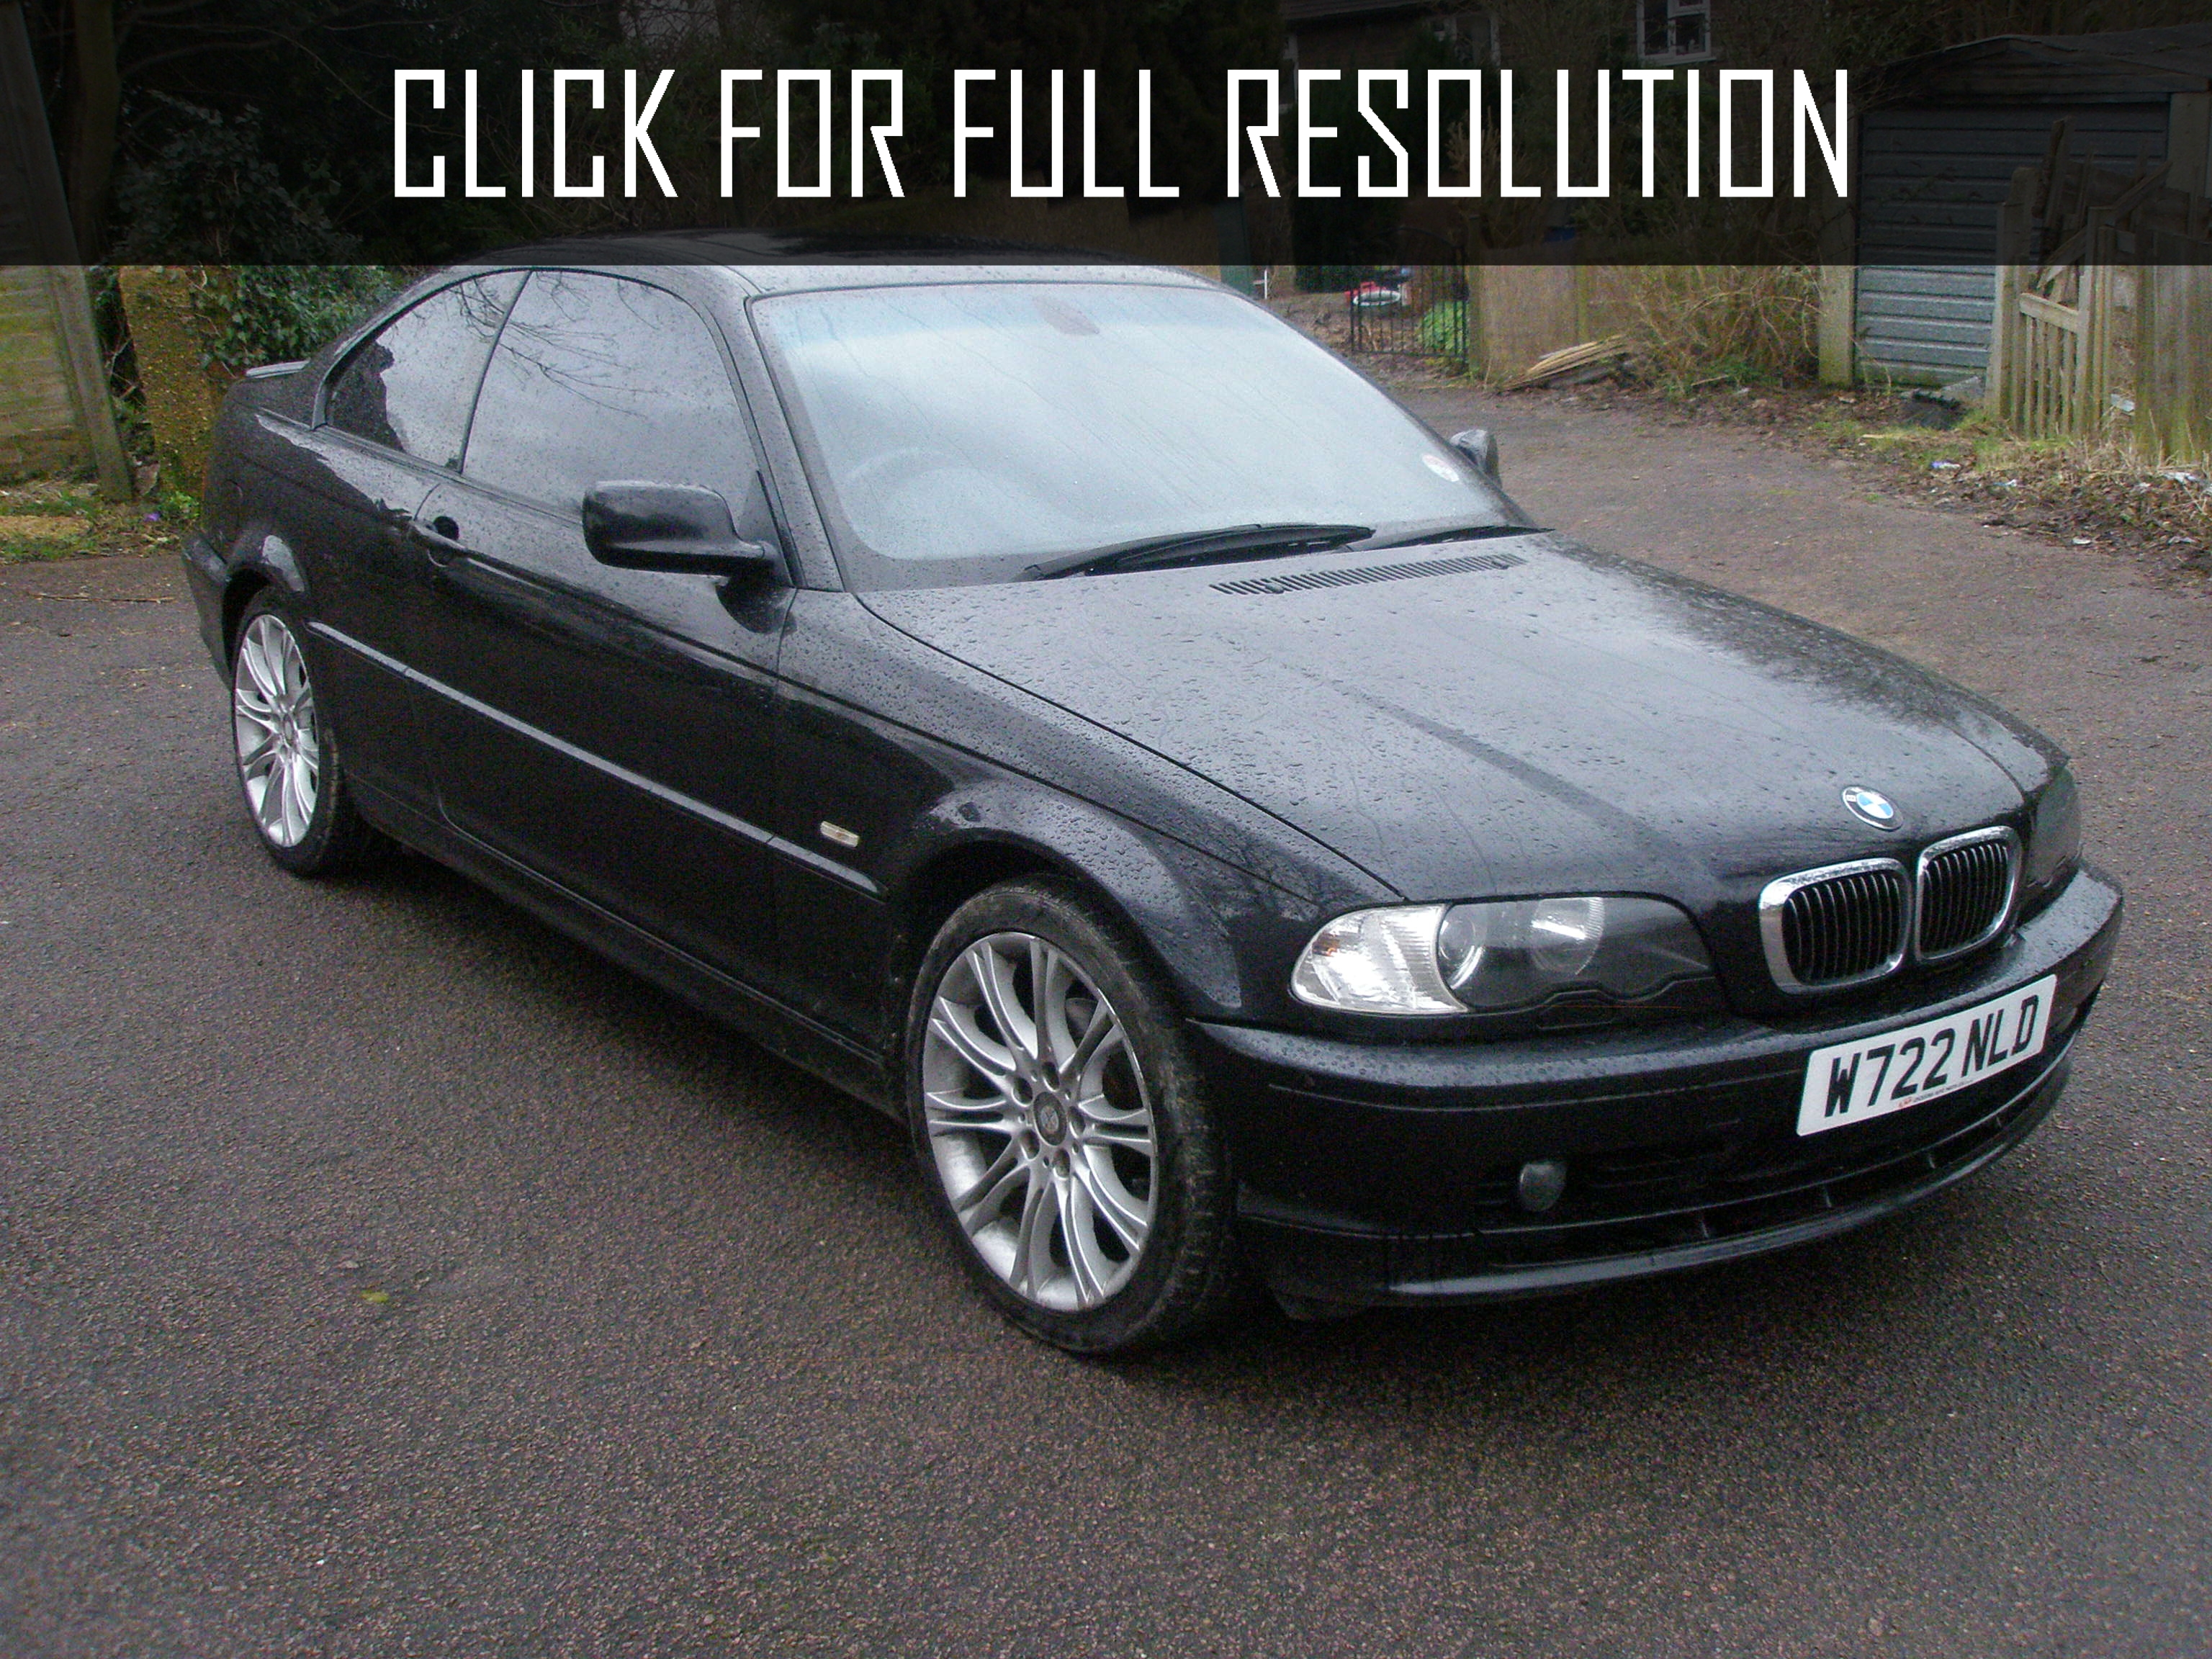 Bmw 320i E46 amazing photo gallery, some information and